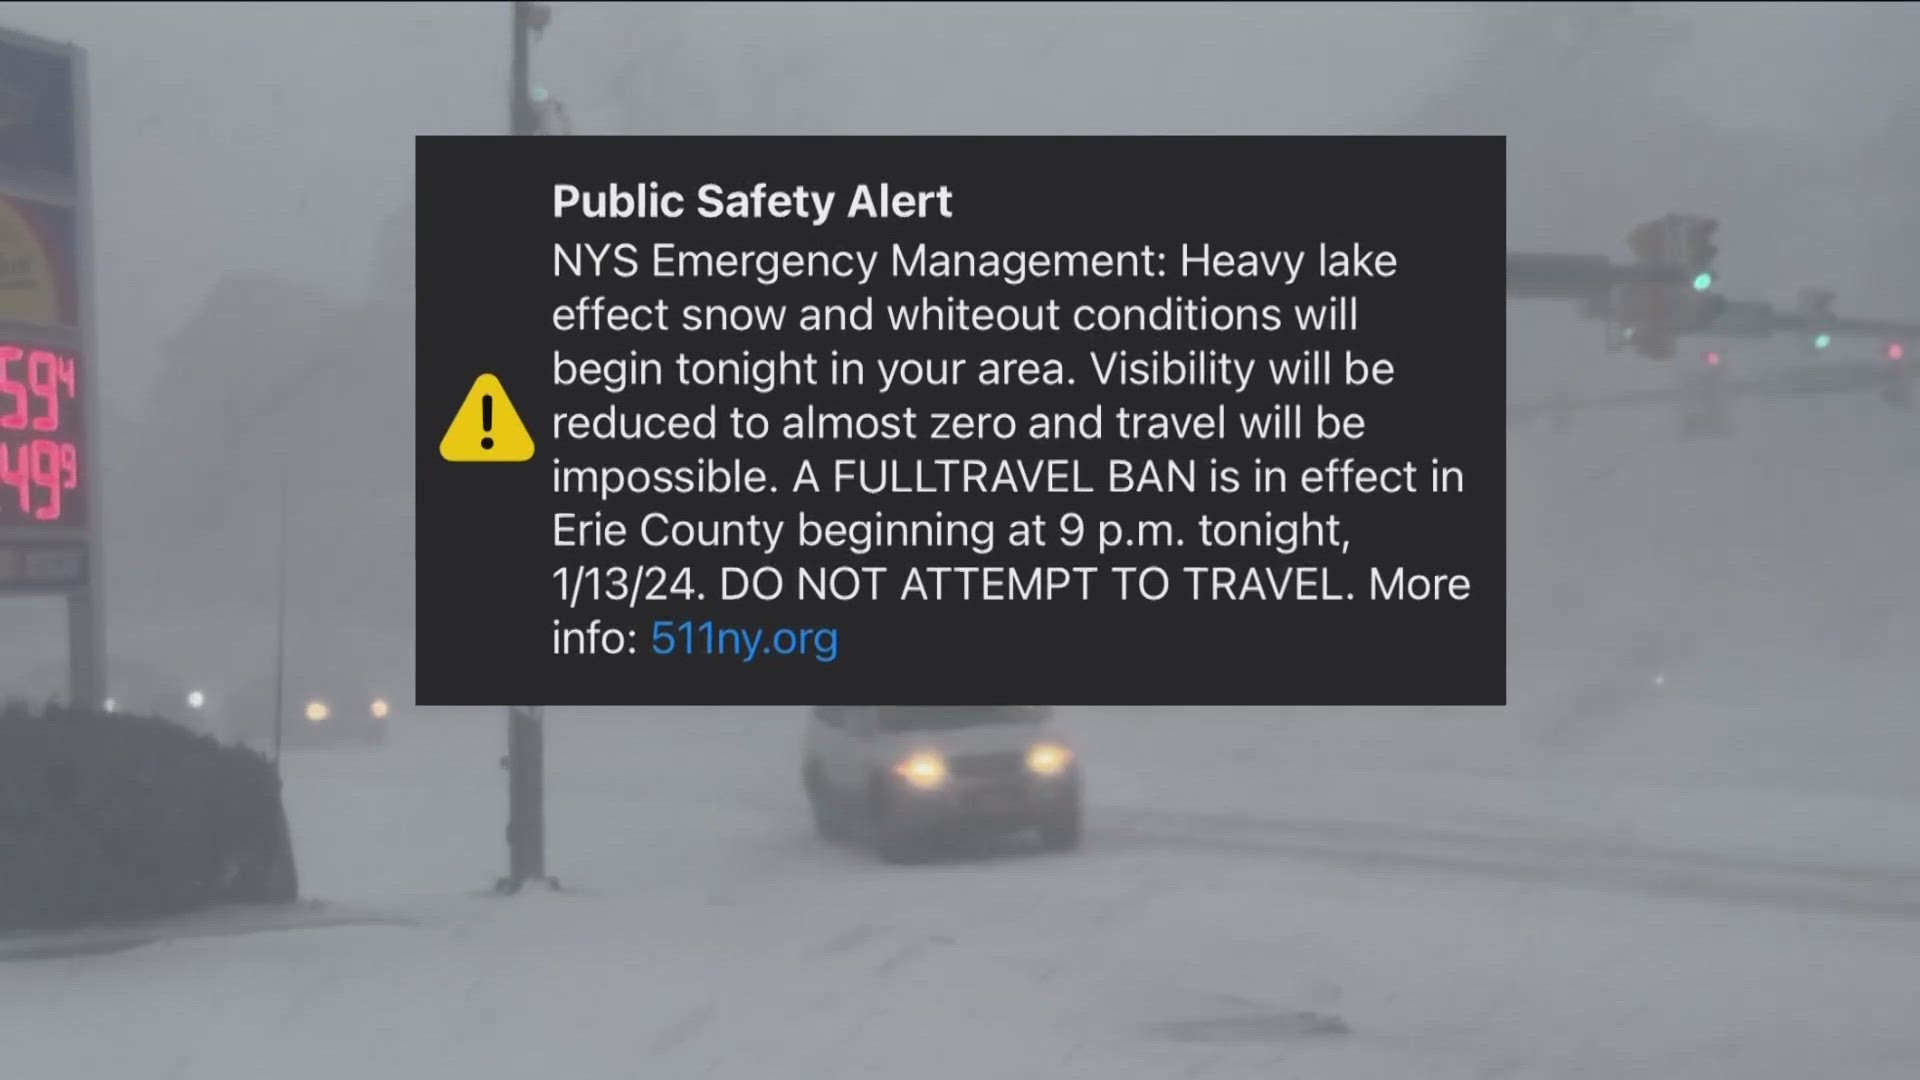 THE COUNTY'S NEW IPAWS SYSTEM ALERTED NEIGHBORS EARLY... AND THE STATE ALSO USED IT TO ISSUE THEIR OWN WARNINGS DURING EACH WEATHER EVENT...